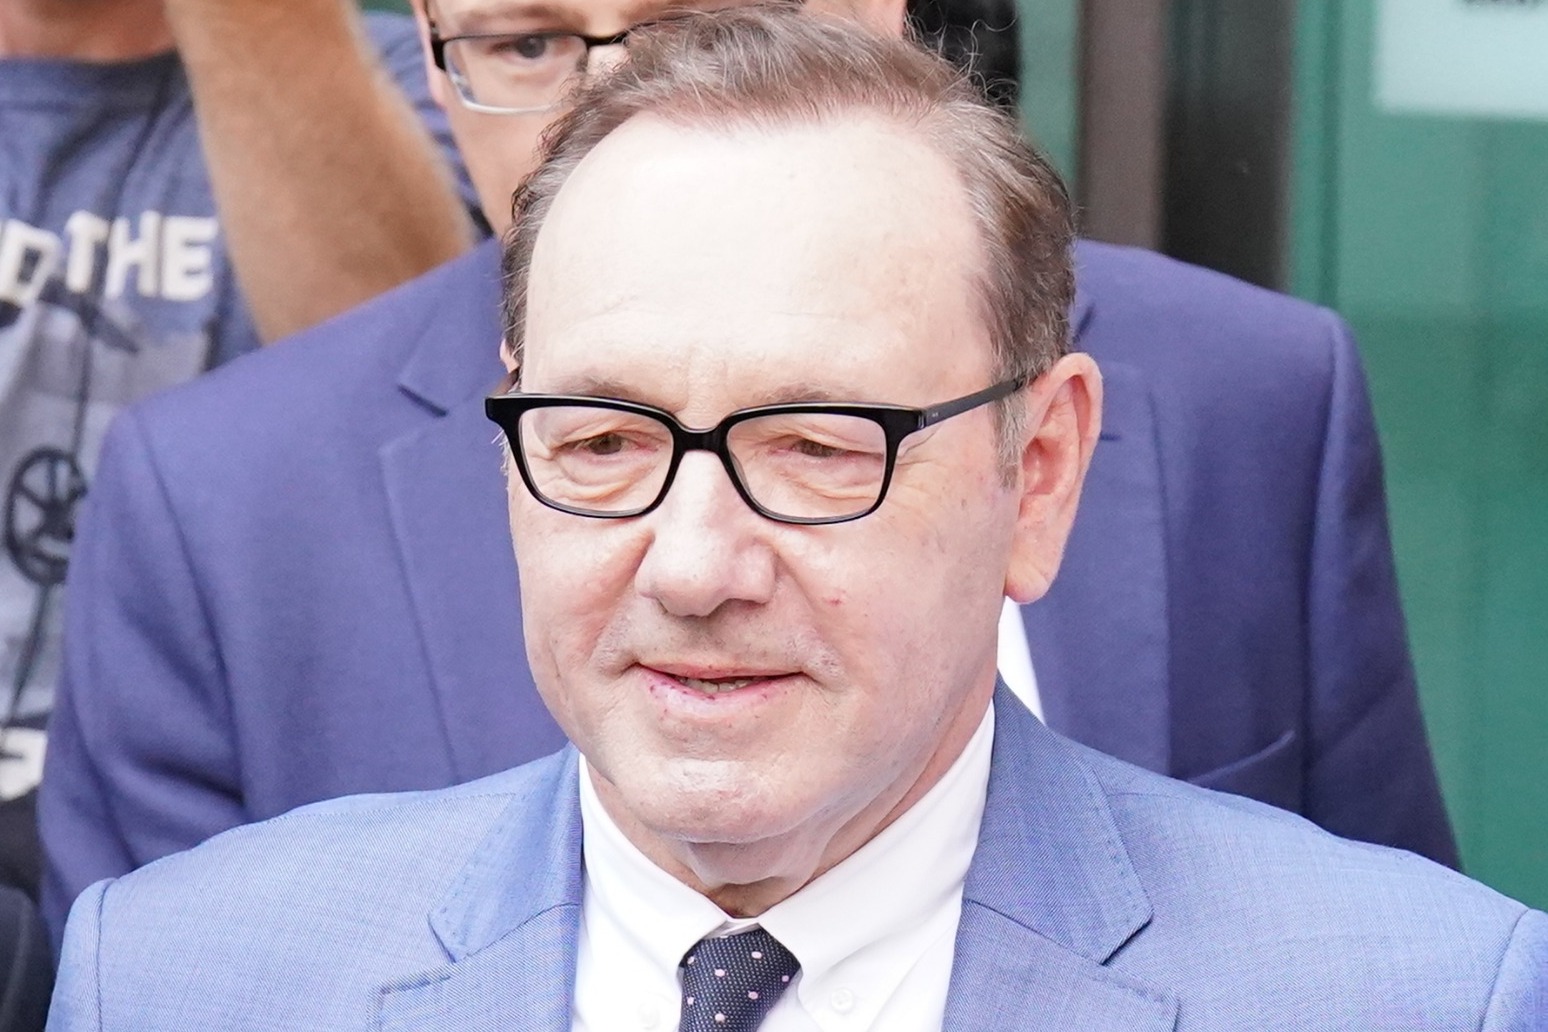 Kevin Spacey appeal to overturn £25.5 million US arbitration award denied 